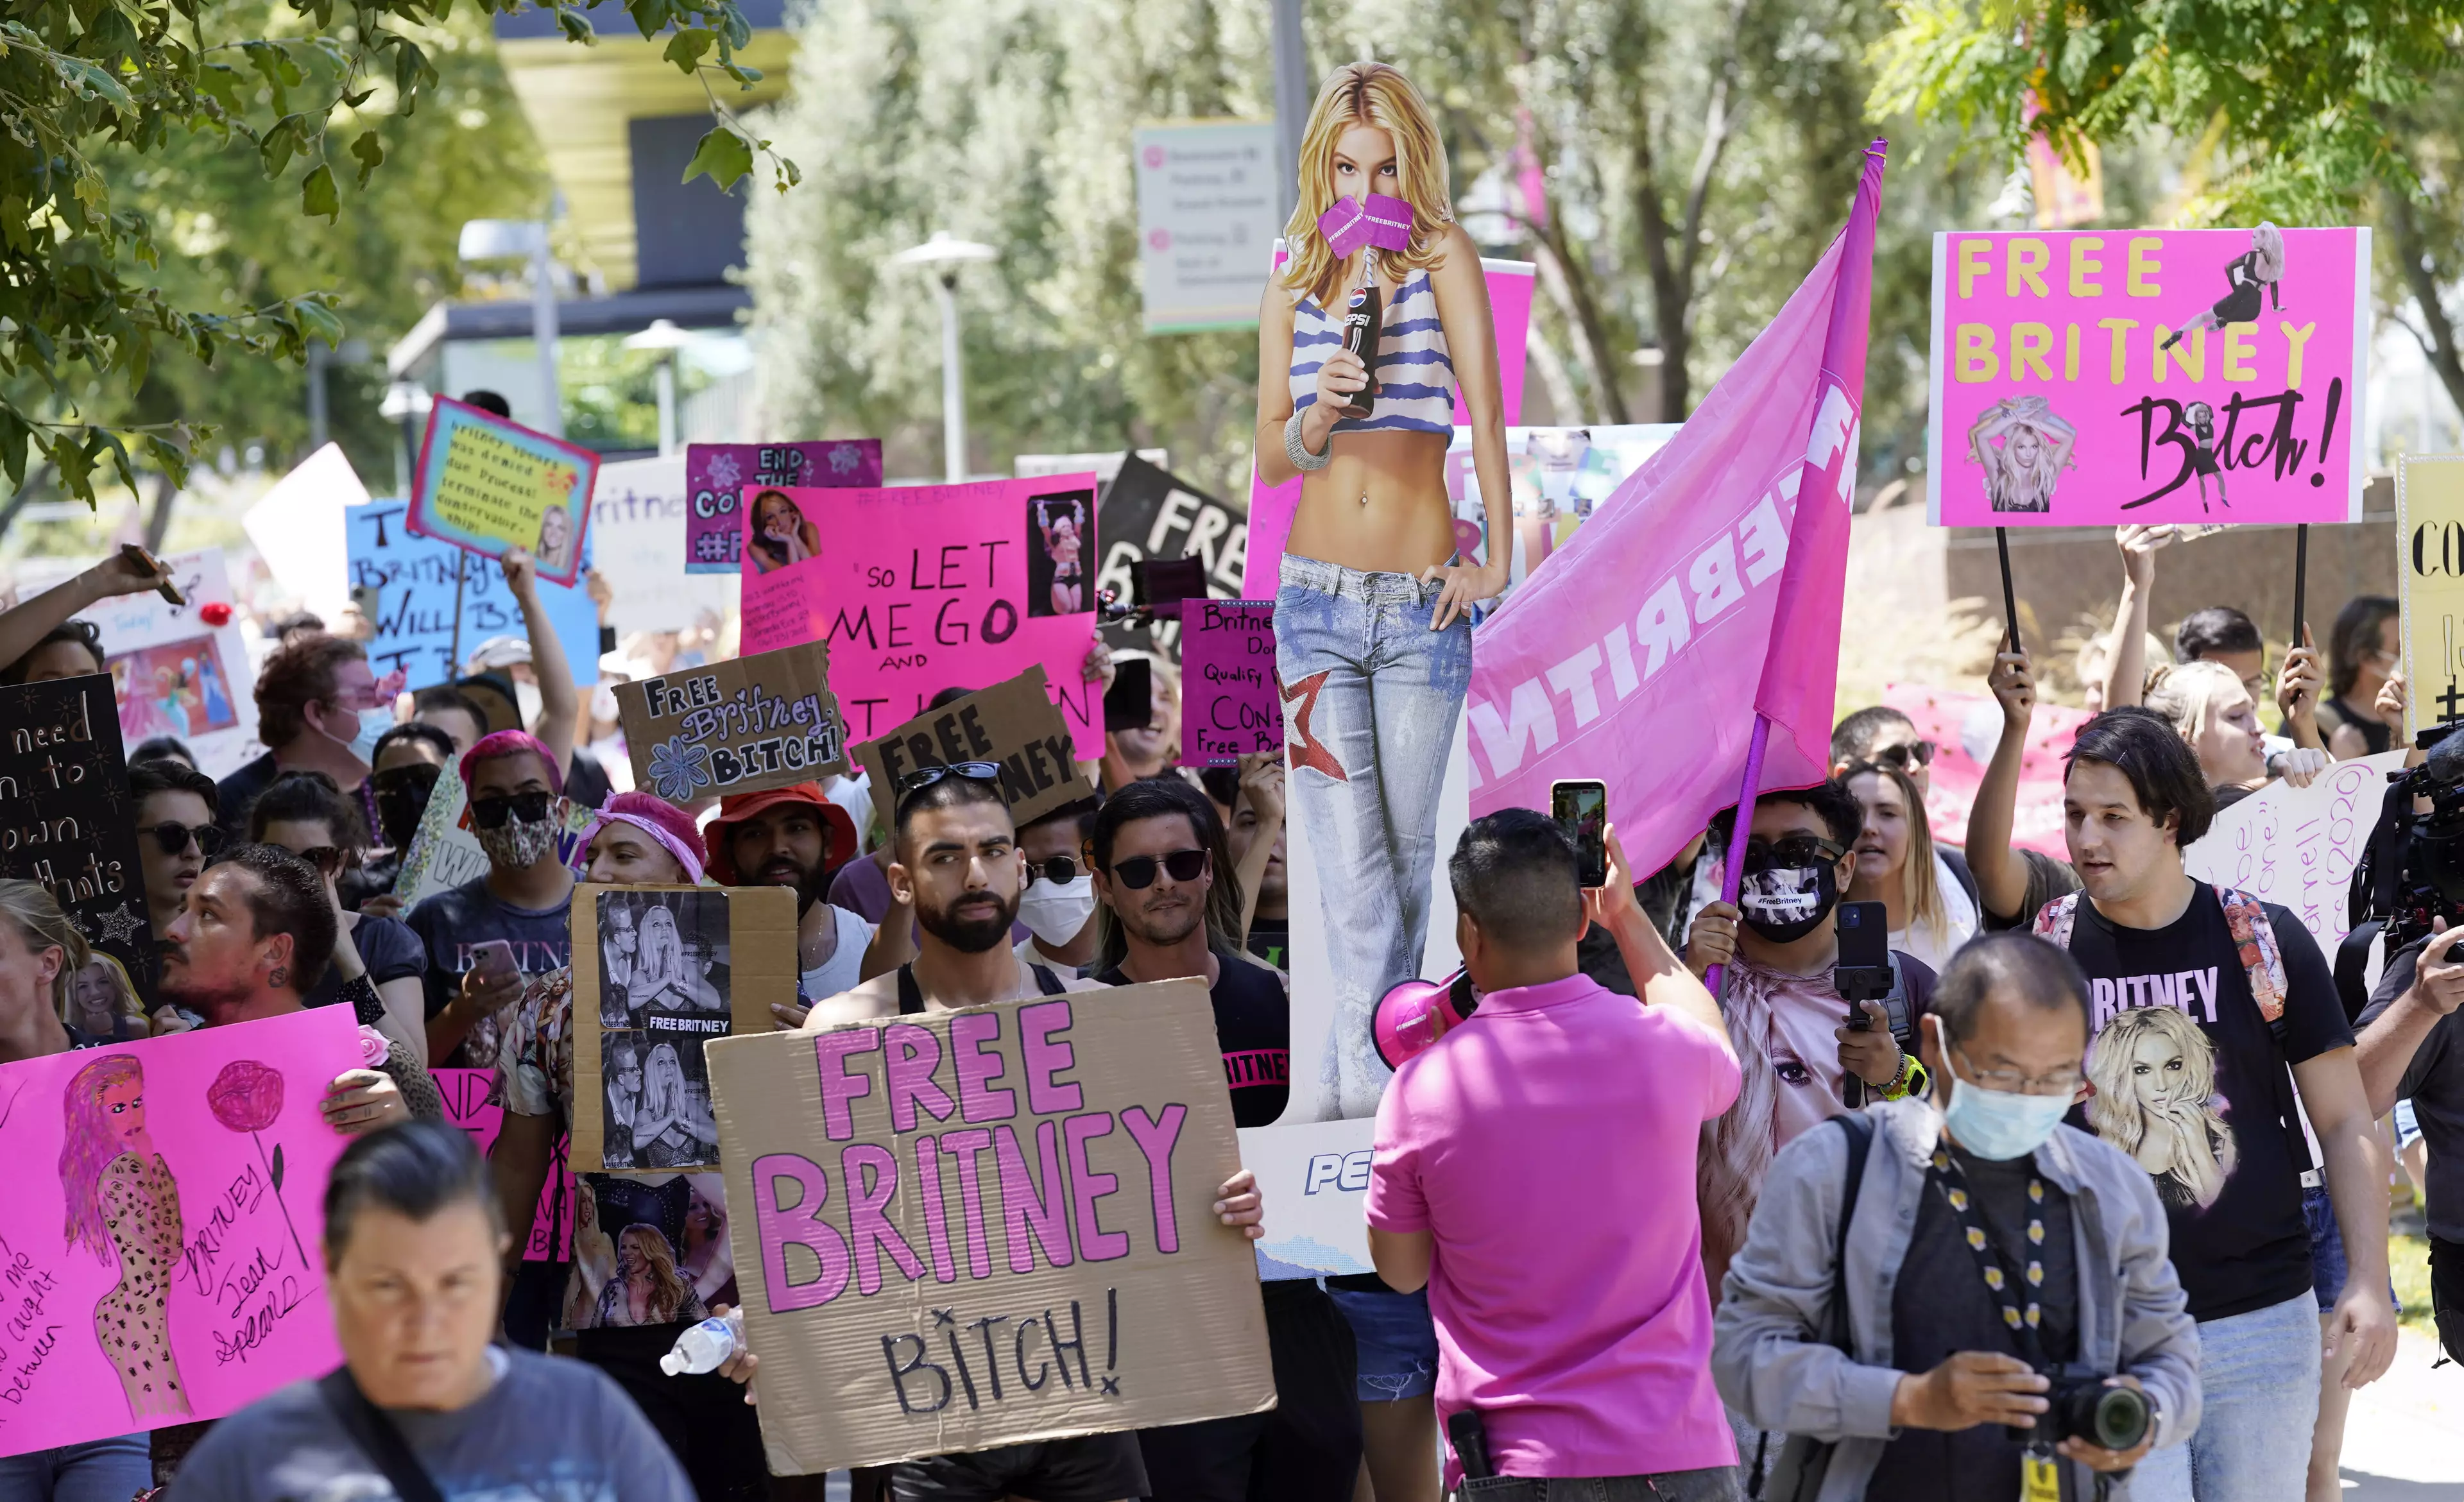 Fans gathered outside the court to show support for Britney (